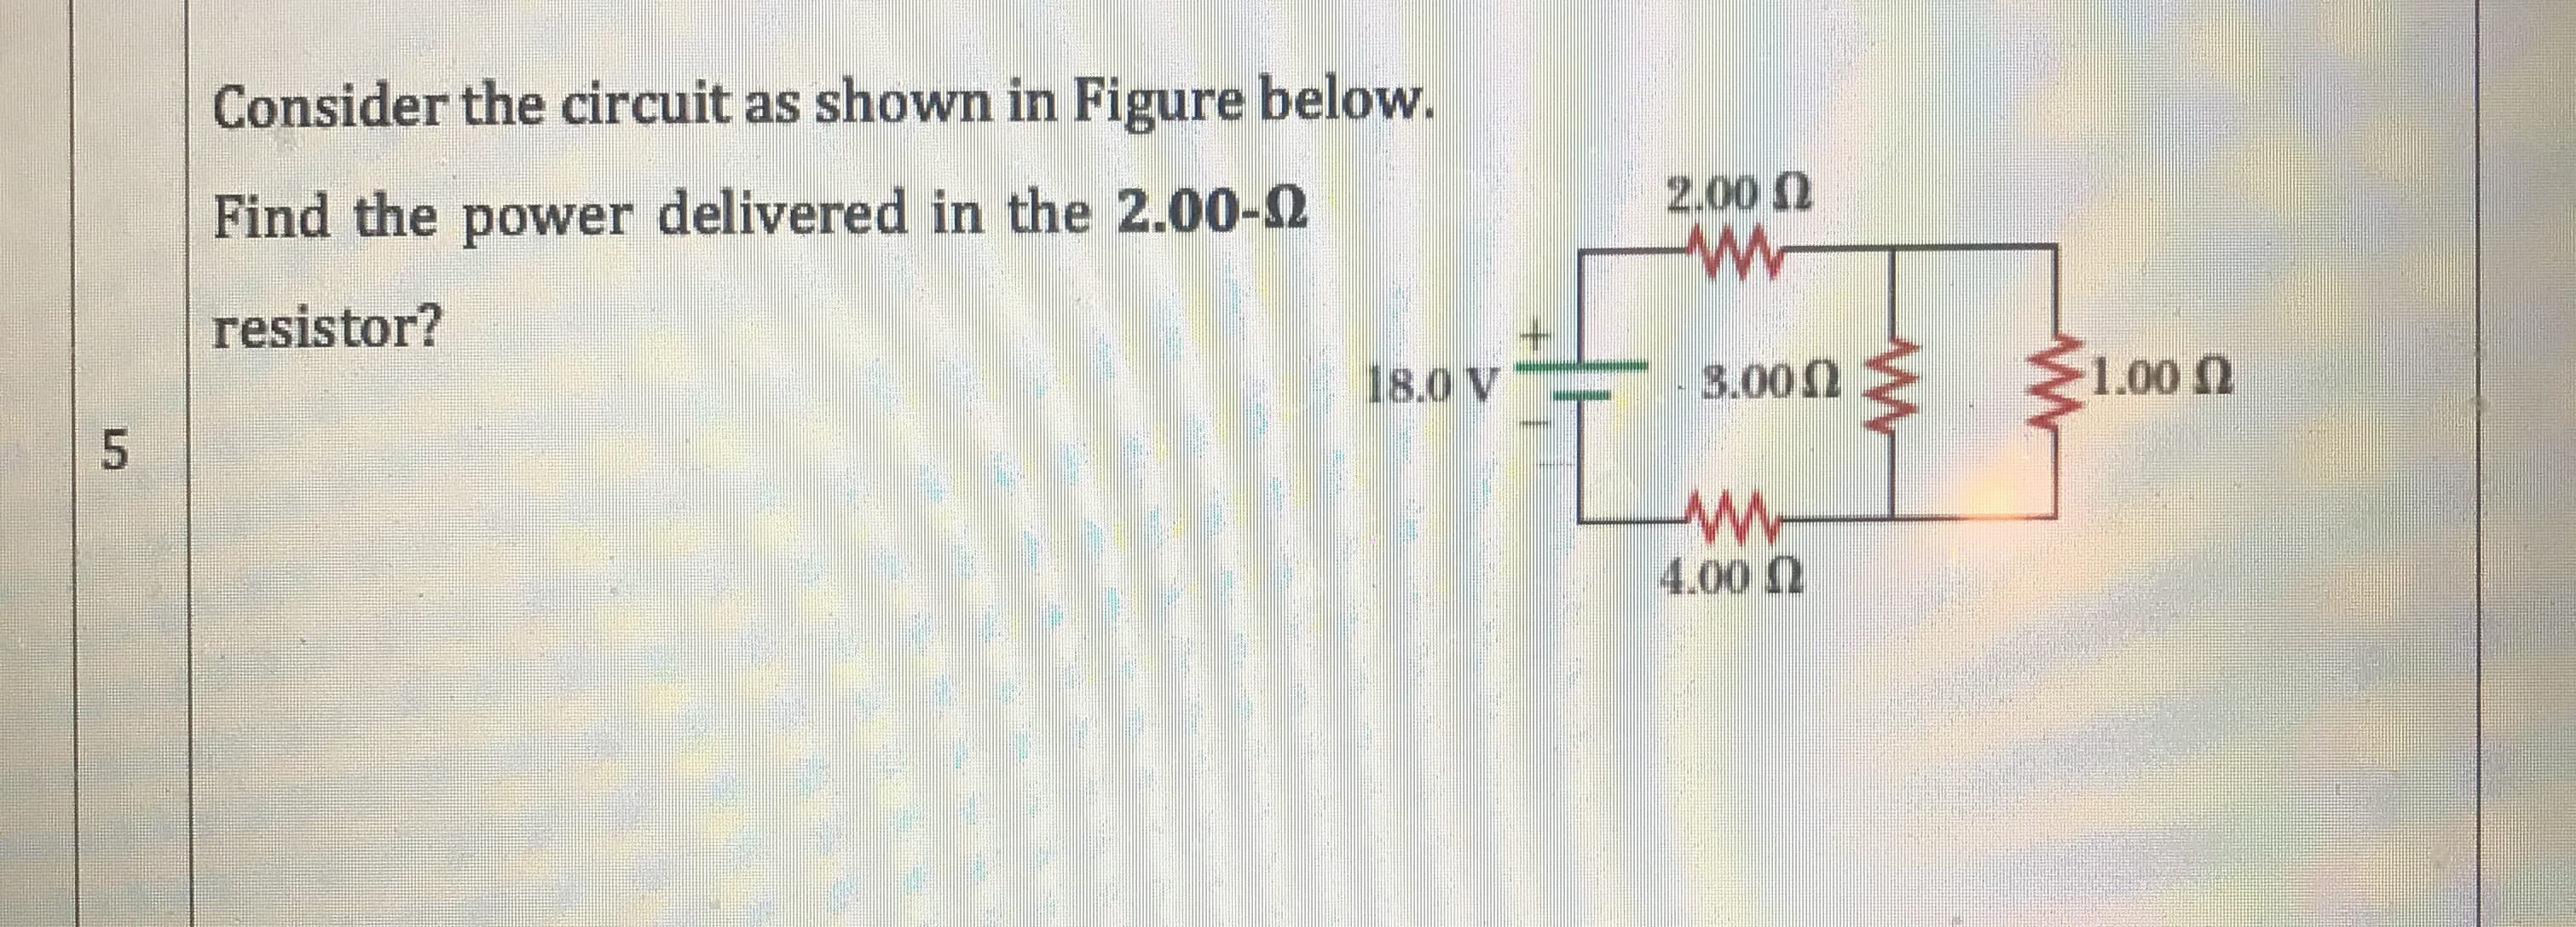 Consider the circuit as shown in Figure below.
2.00 0
Find the power delivered in the 2.00-2
resistor?
18.0 V
3.000
1.00 n
4.00 2
